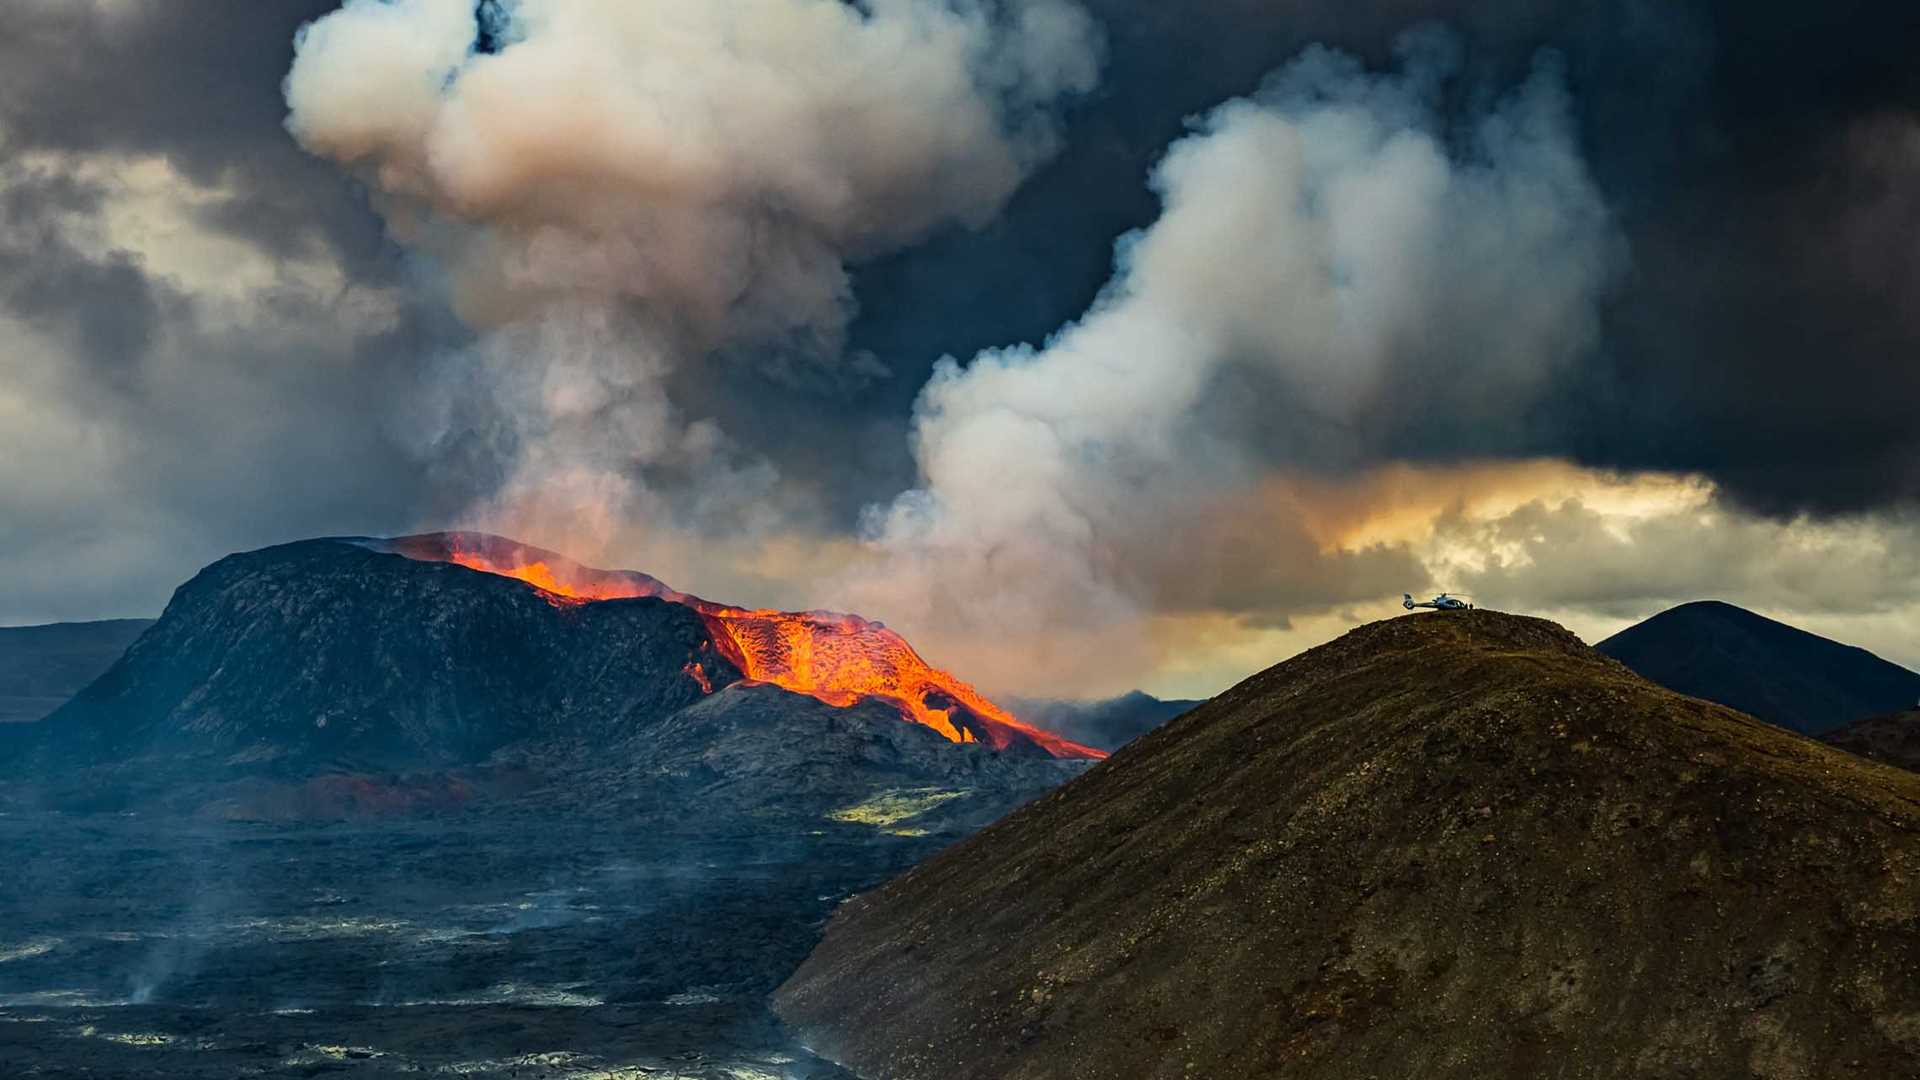 Erupting volcano in Iceland with helicopter on nearby peak